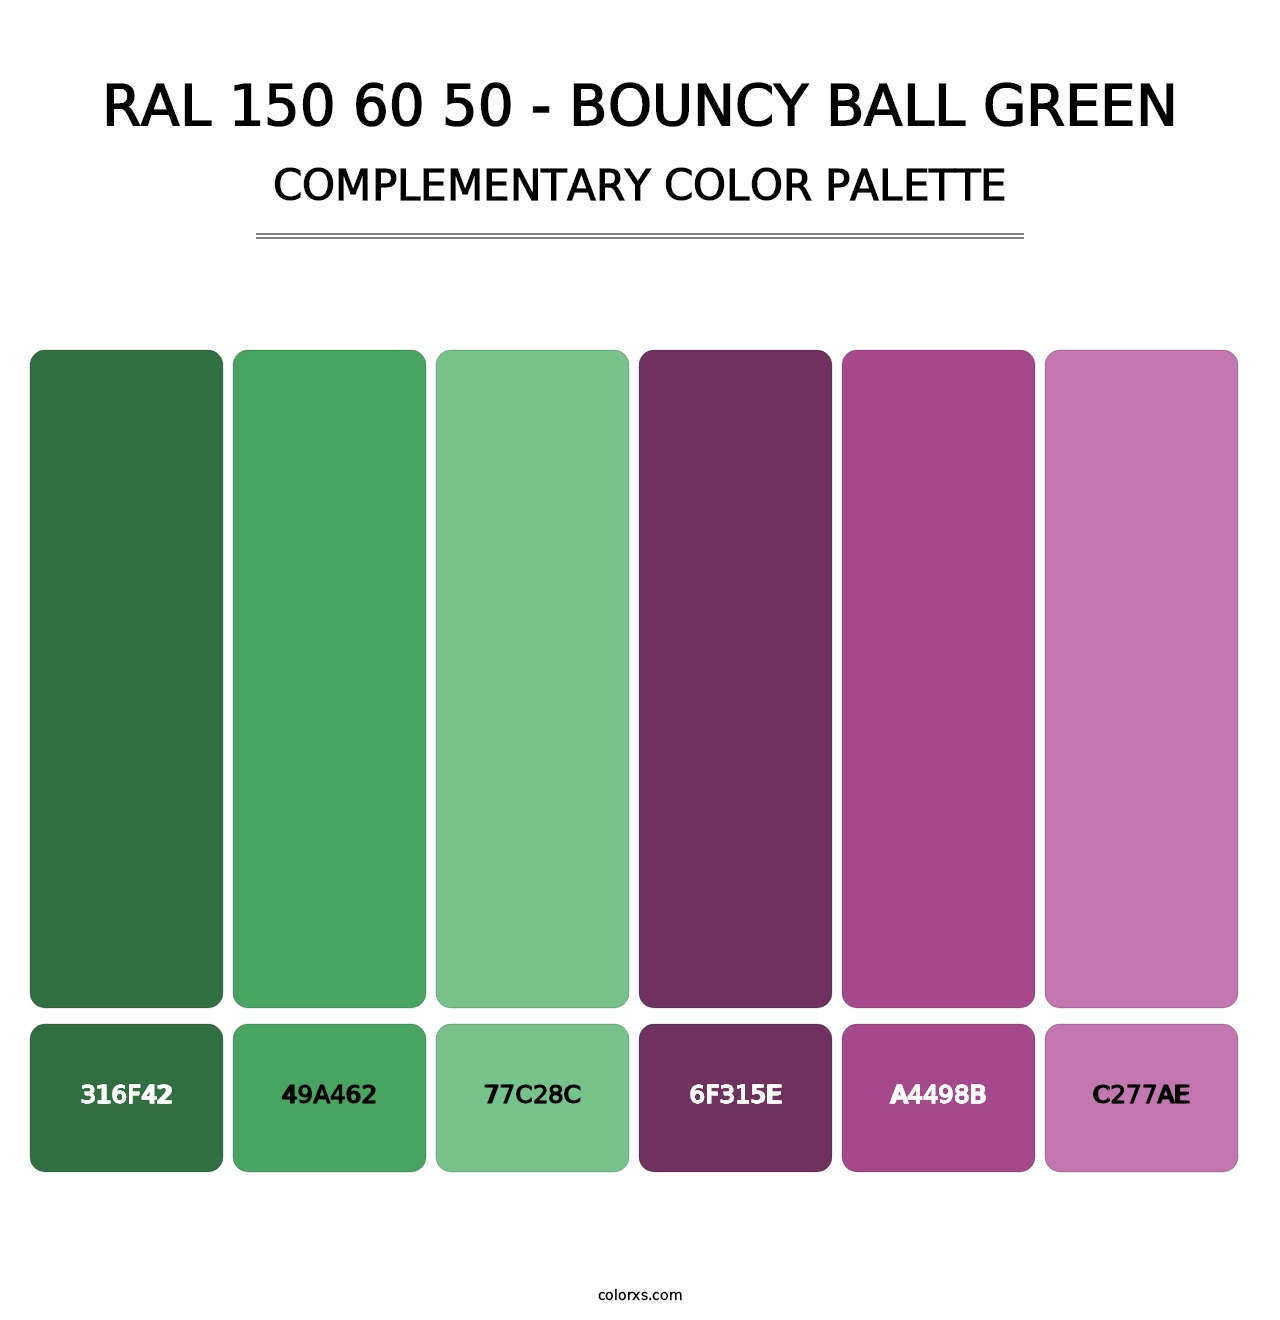 RAL 150 60 50 - Bouncy Ball Green - Complementary Color Palette